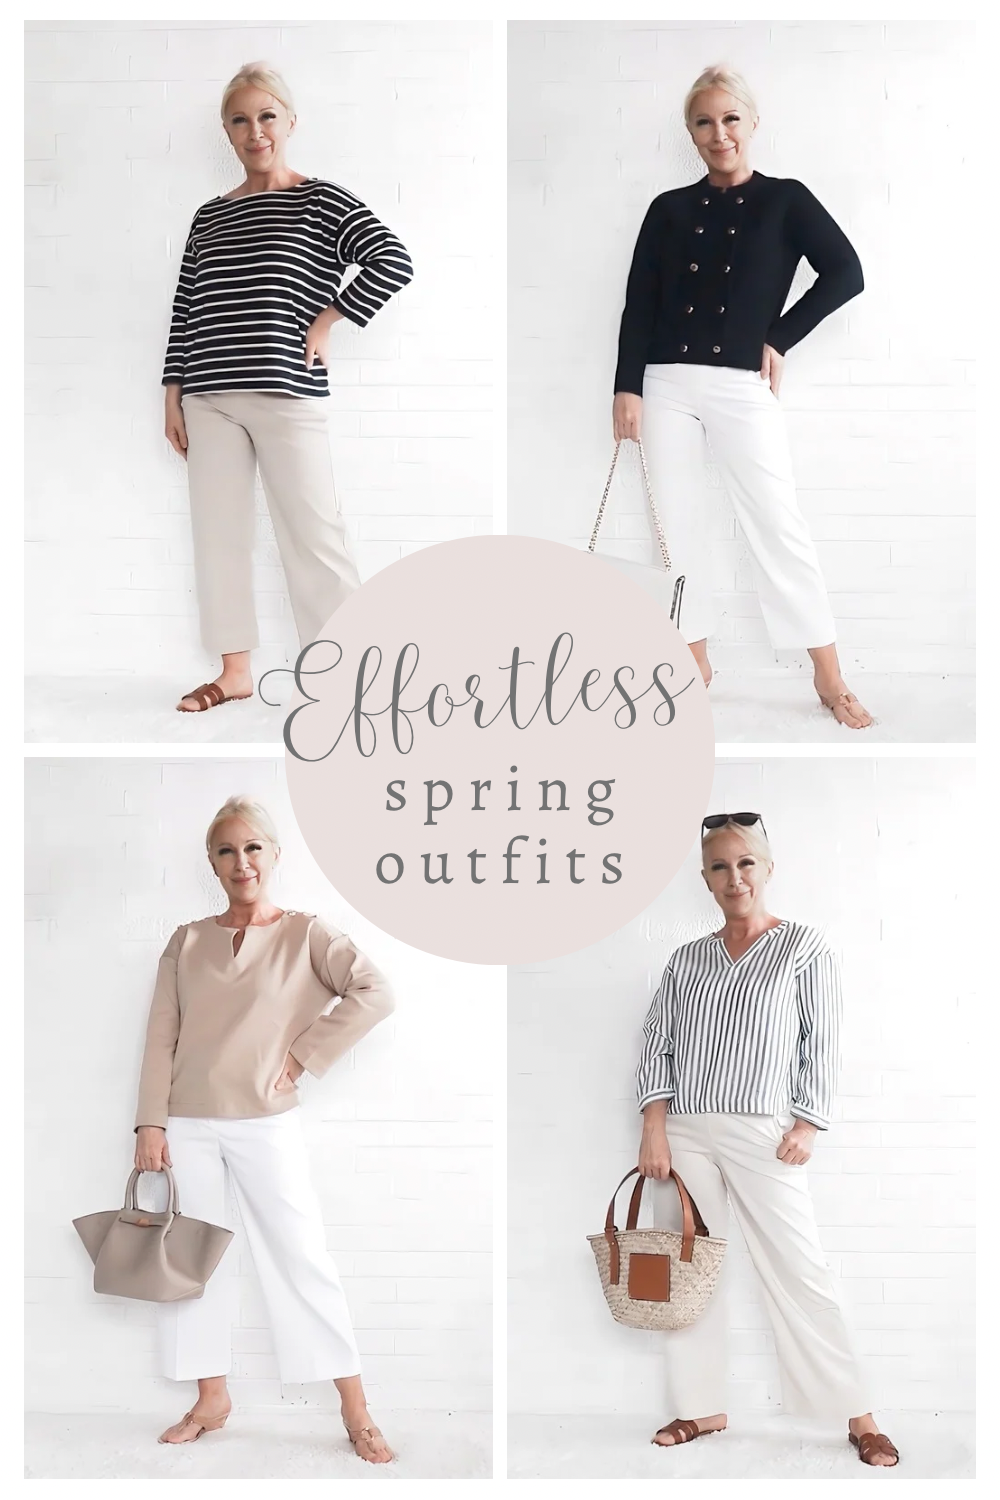 Effortless Spring Outfits for Women Over 40, Women Over 50, Women Over 60